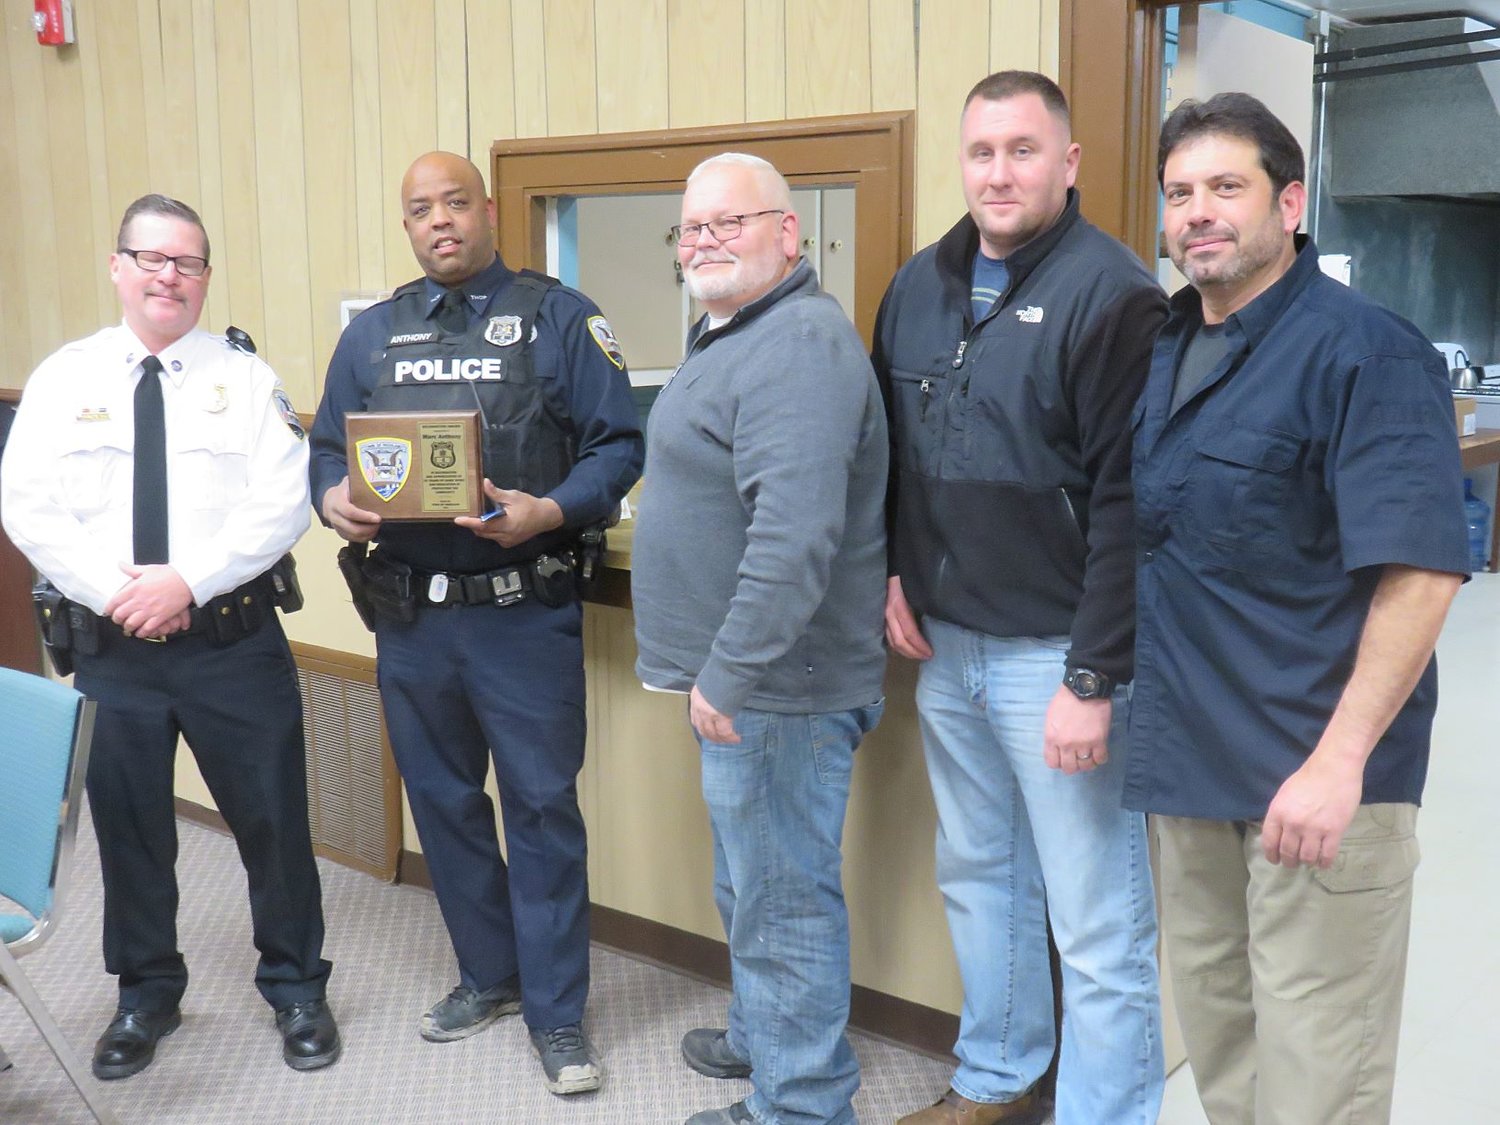 The patrol activities of Town of Highland Constable Chief Mike Walton, left, and constables Marc Anthony, Scott VanTuyl, Stephen Milisauskis and John Arias are temporarily suspended. This photo was on the occasion of commemorating Anthony's 30 years of service to the town on December 10, 2019.